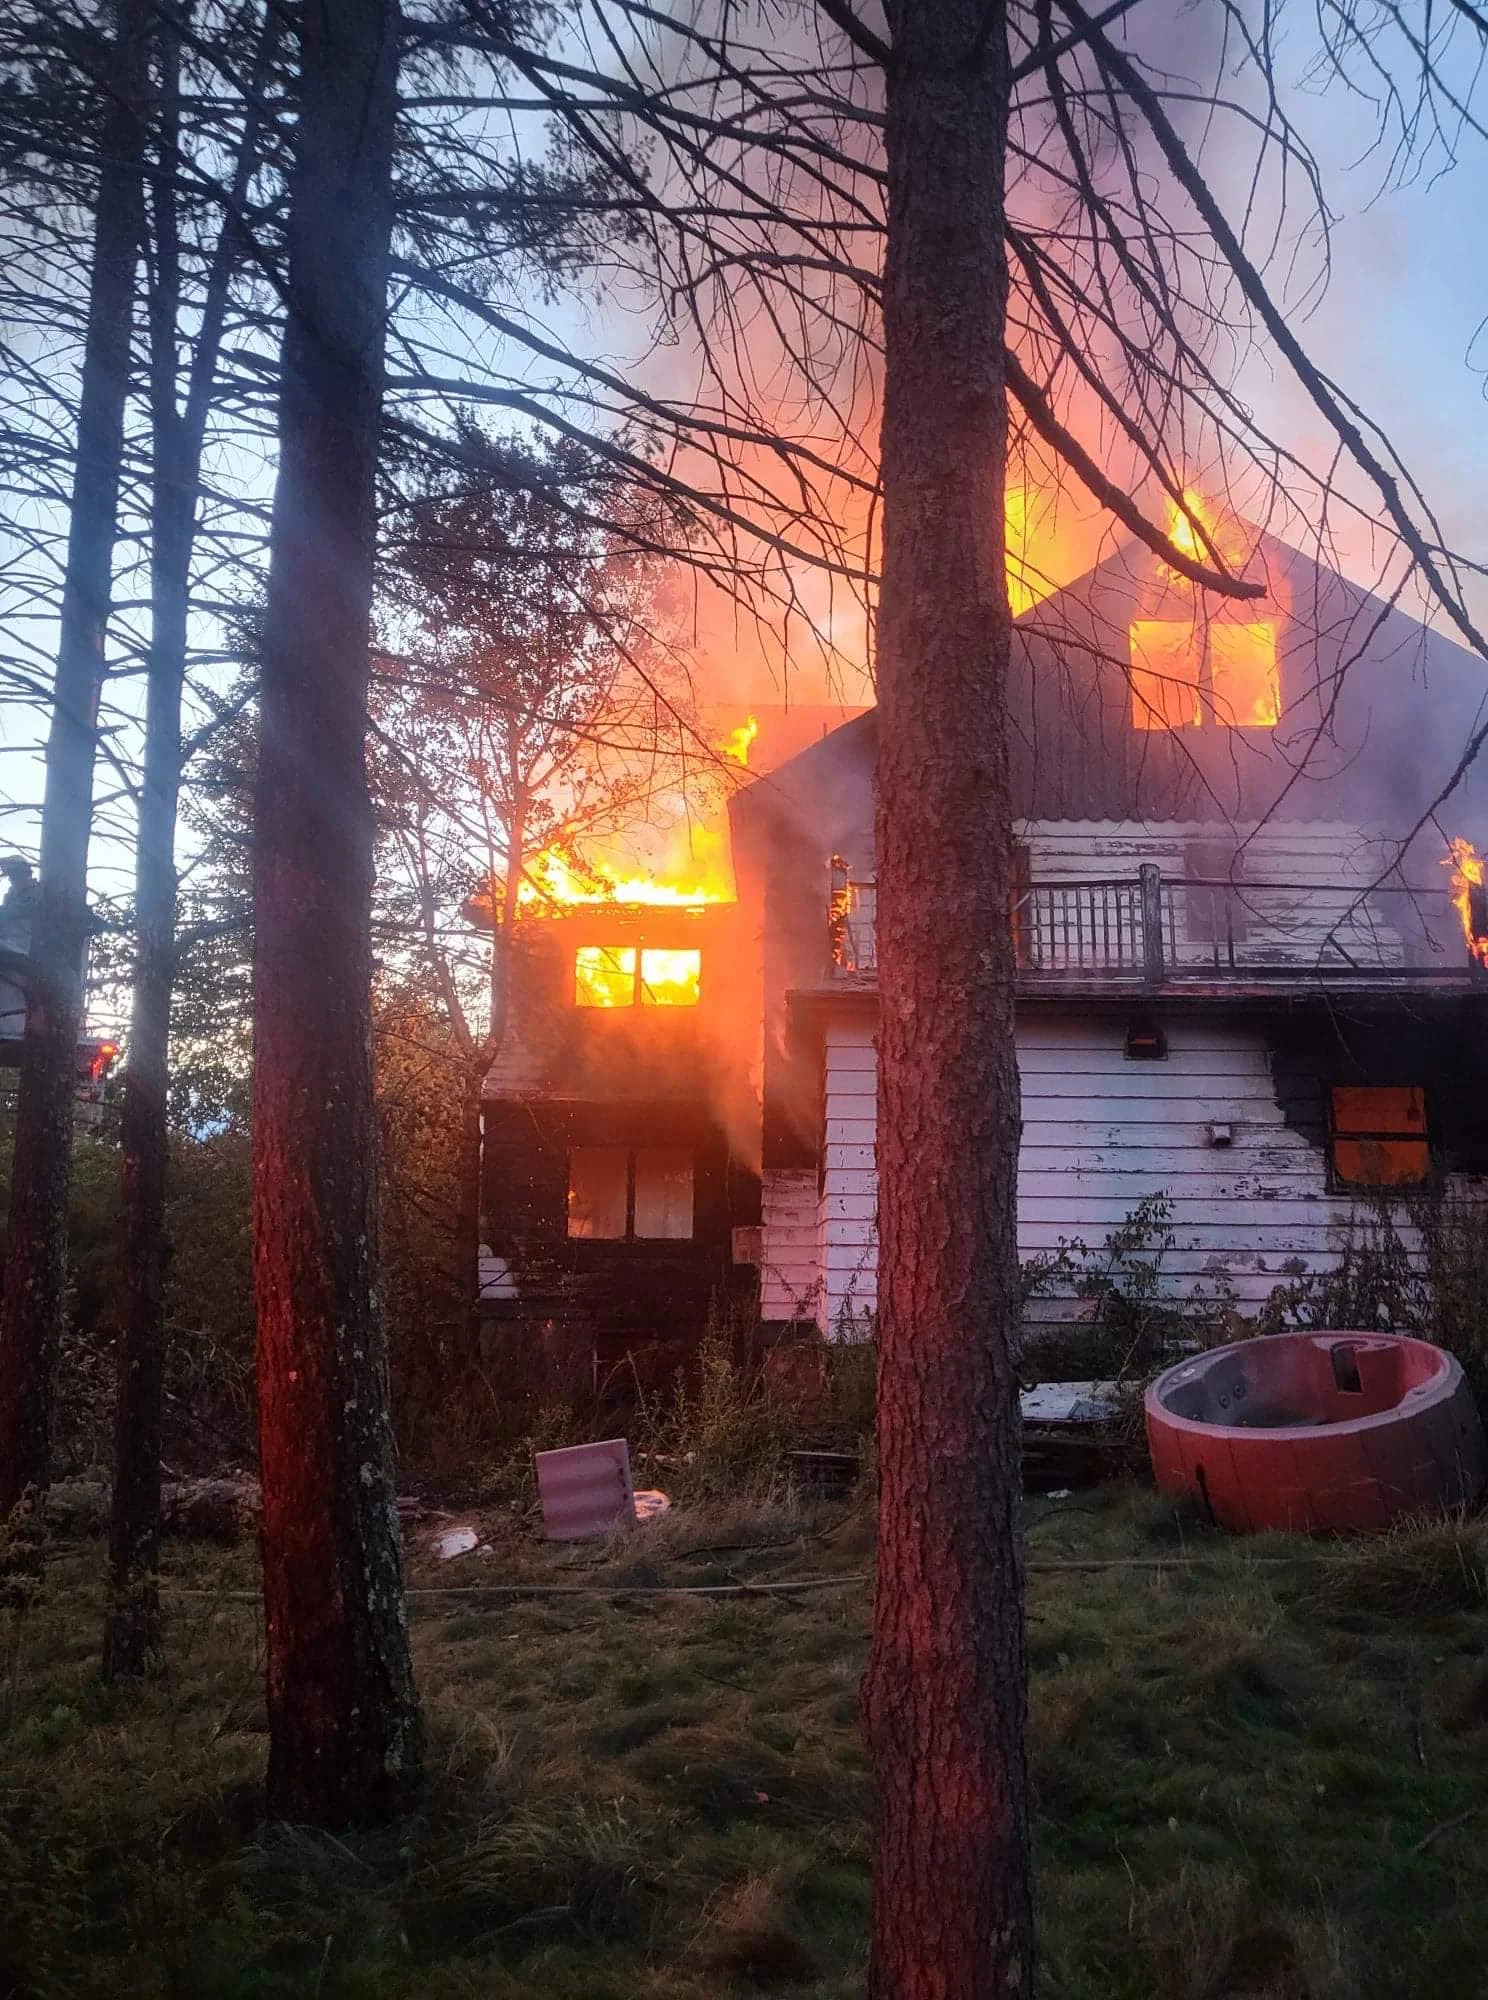 Upstate New York Hotel That Inspired Dirty Dancing Destroyed picture